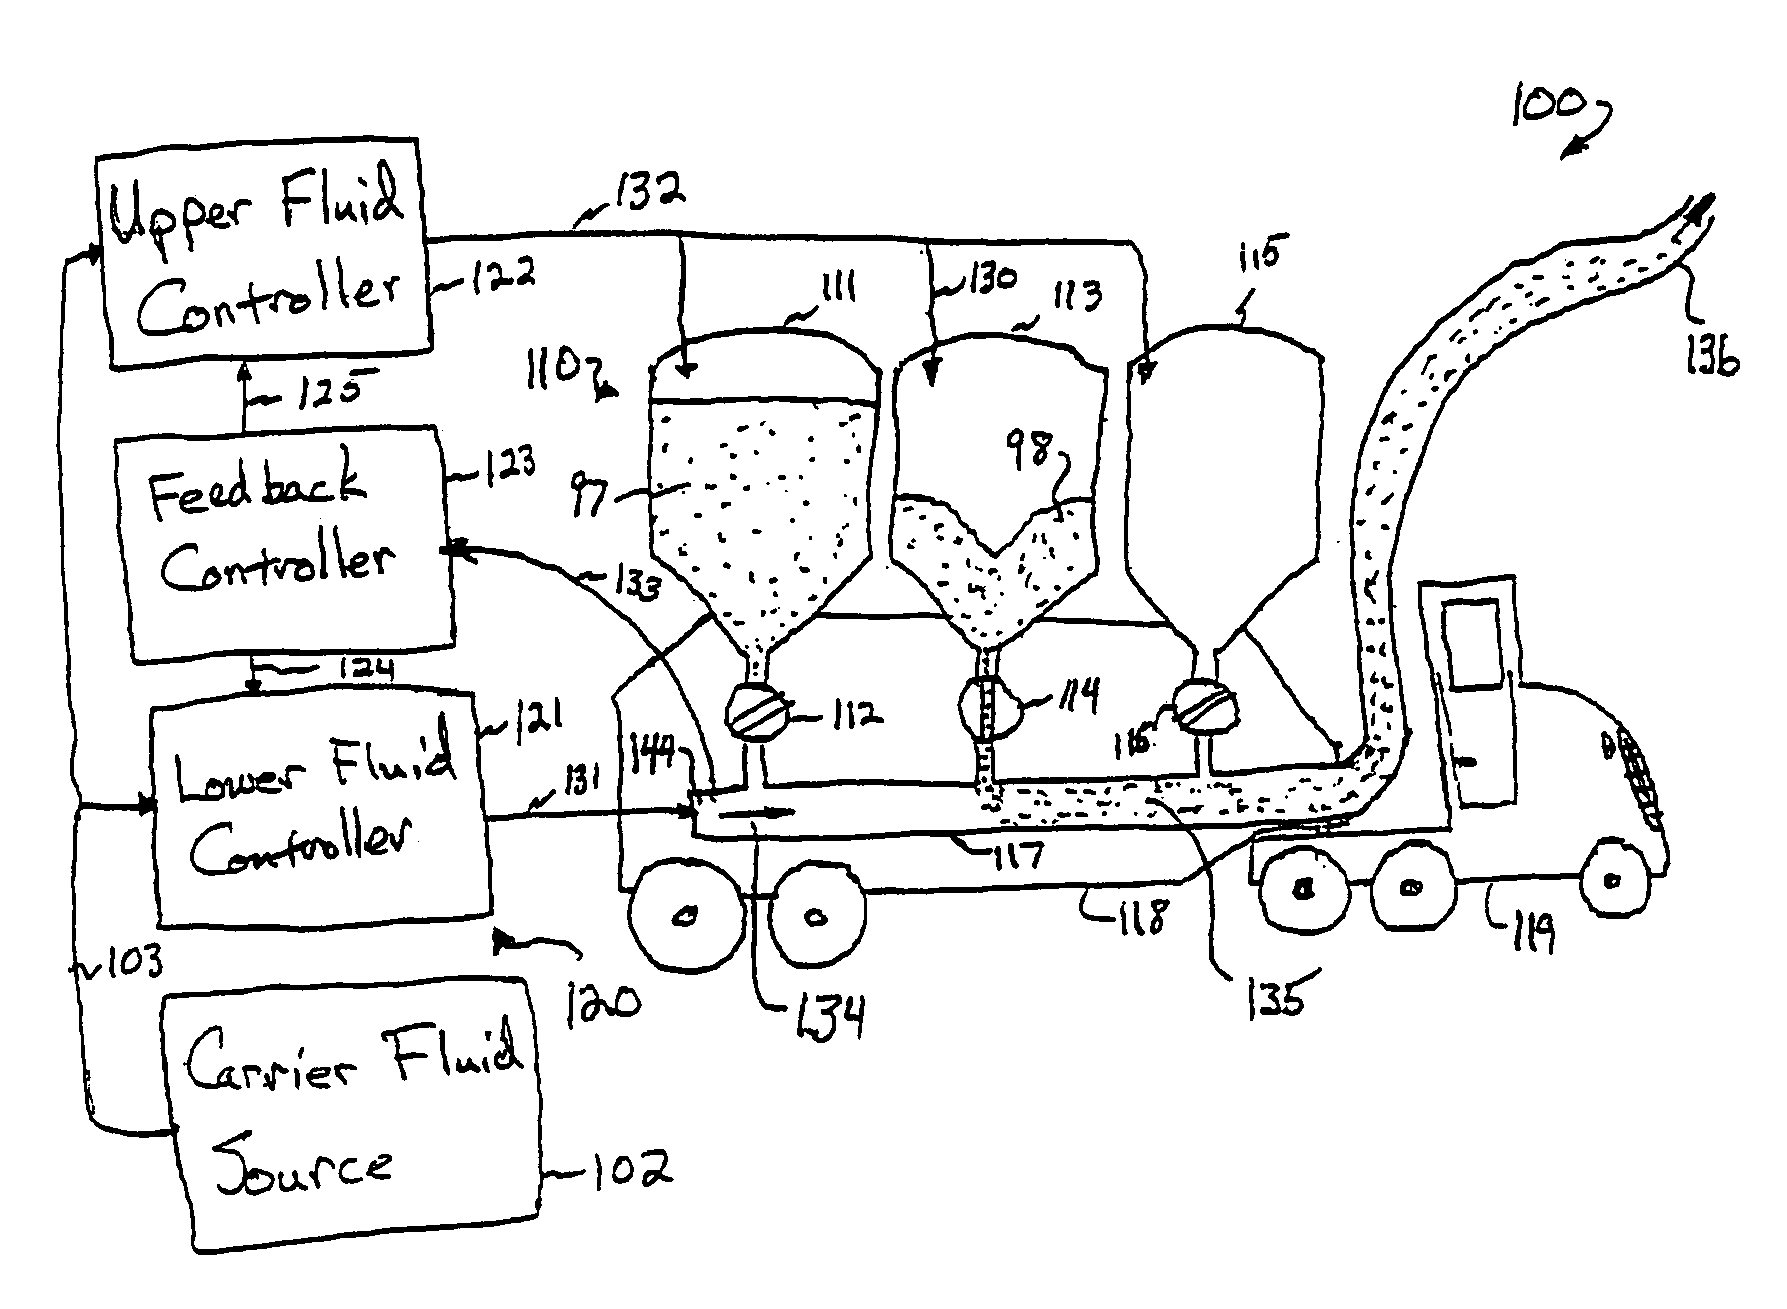 Apparatus and method for controlling fluid flows for pneumatic conveying